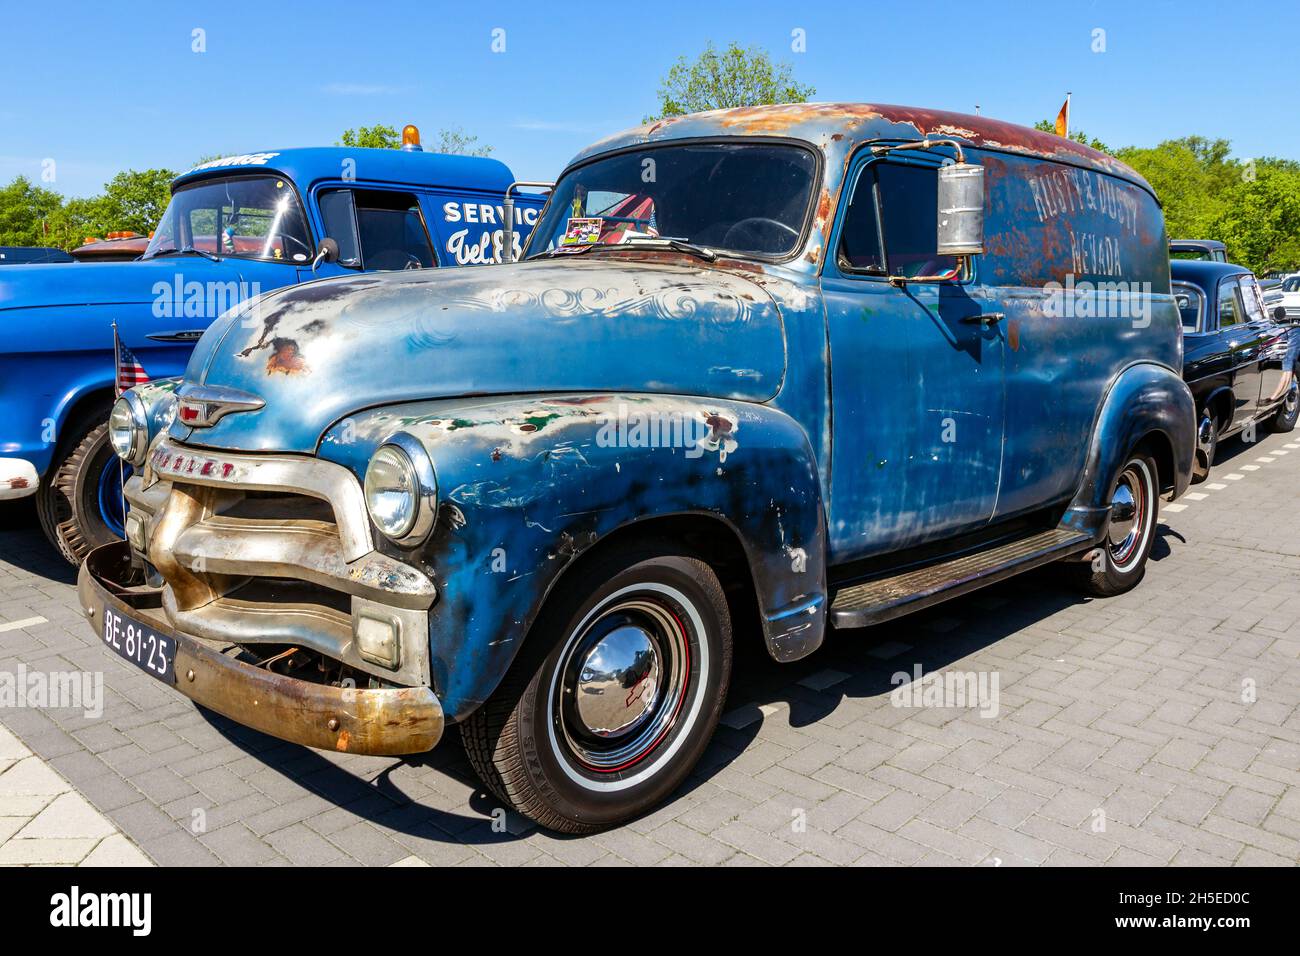 1954 Chevrolet Panel Van classic truck on the parking lot. Rosmalen, The Netherlands - May 8, 2016 Stock Photo